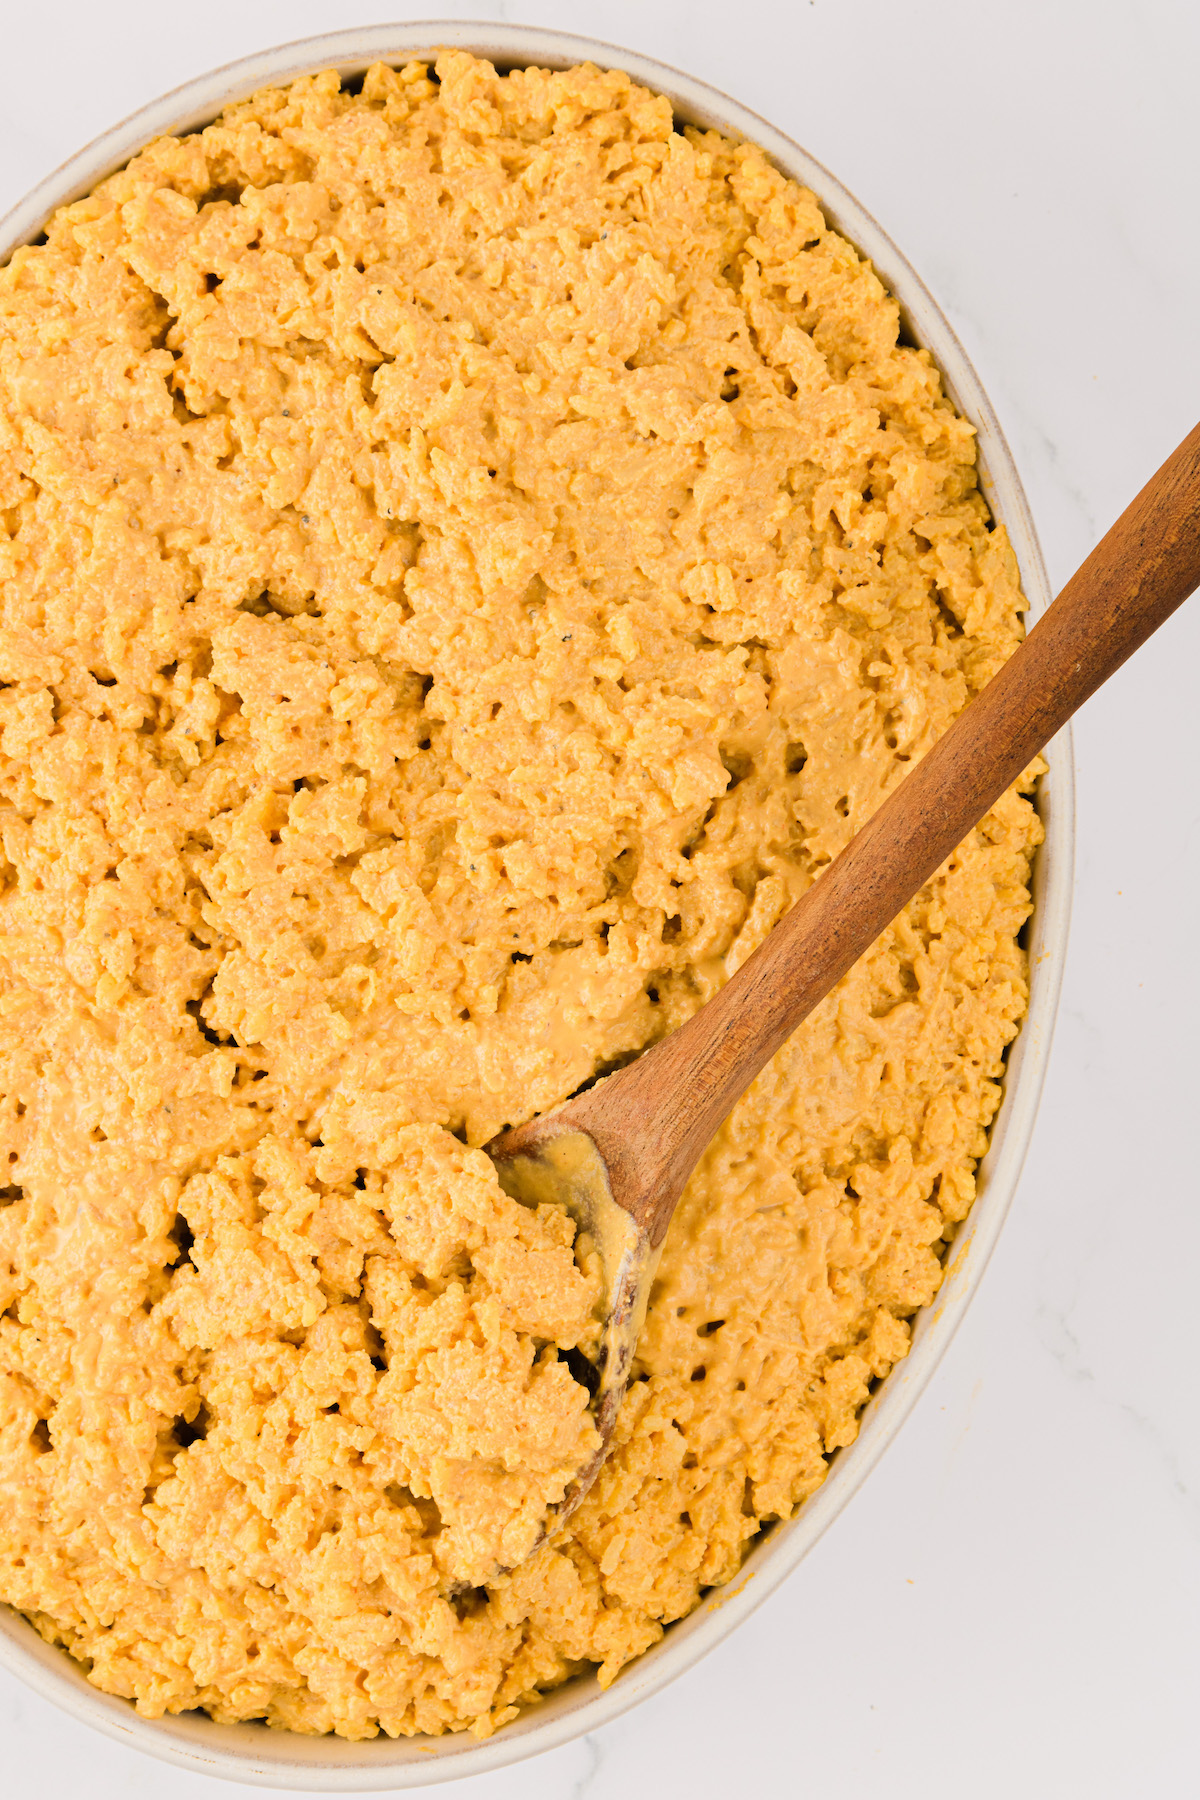 Overhead view of vegan cheesy rice in serving bowl with wooden spoon